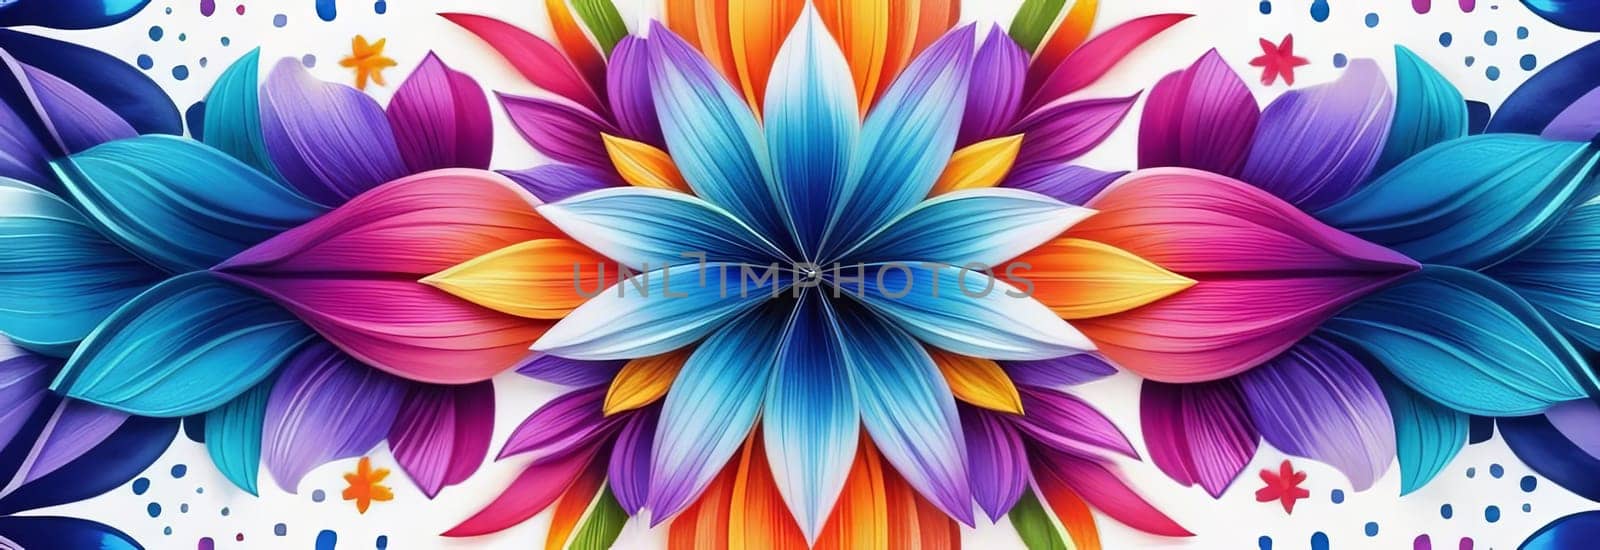 Vibrant colorful floral pattern set against white background, creating visually appealing, colorful design. For home interior, bedroom, living room, childrens room to add bright colors, coziness